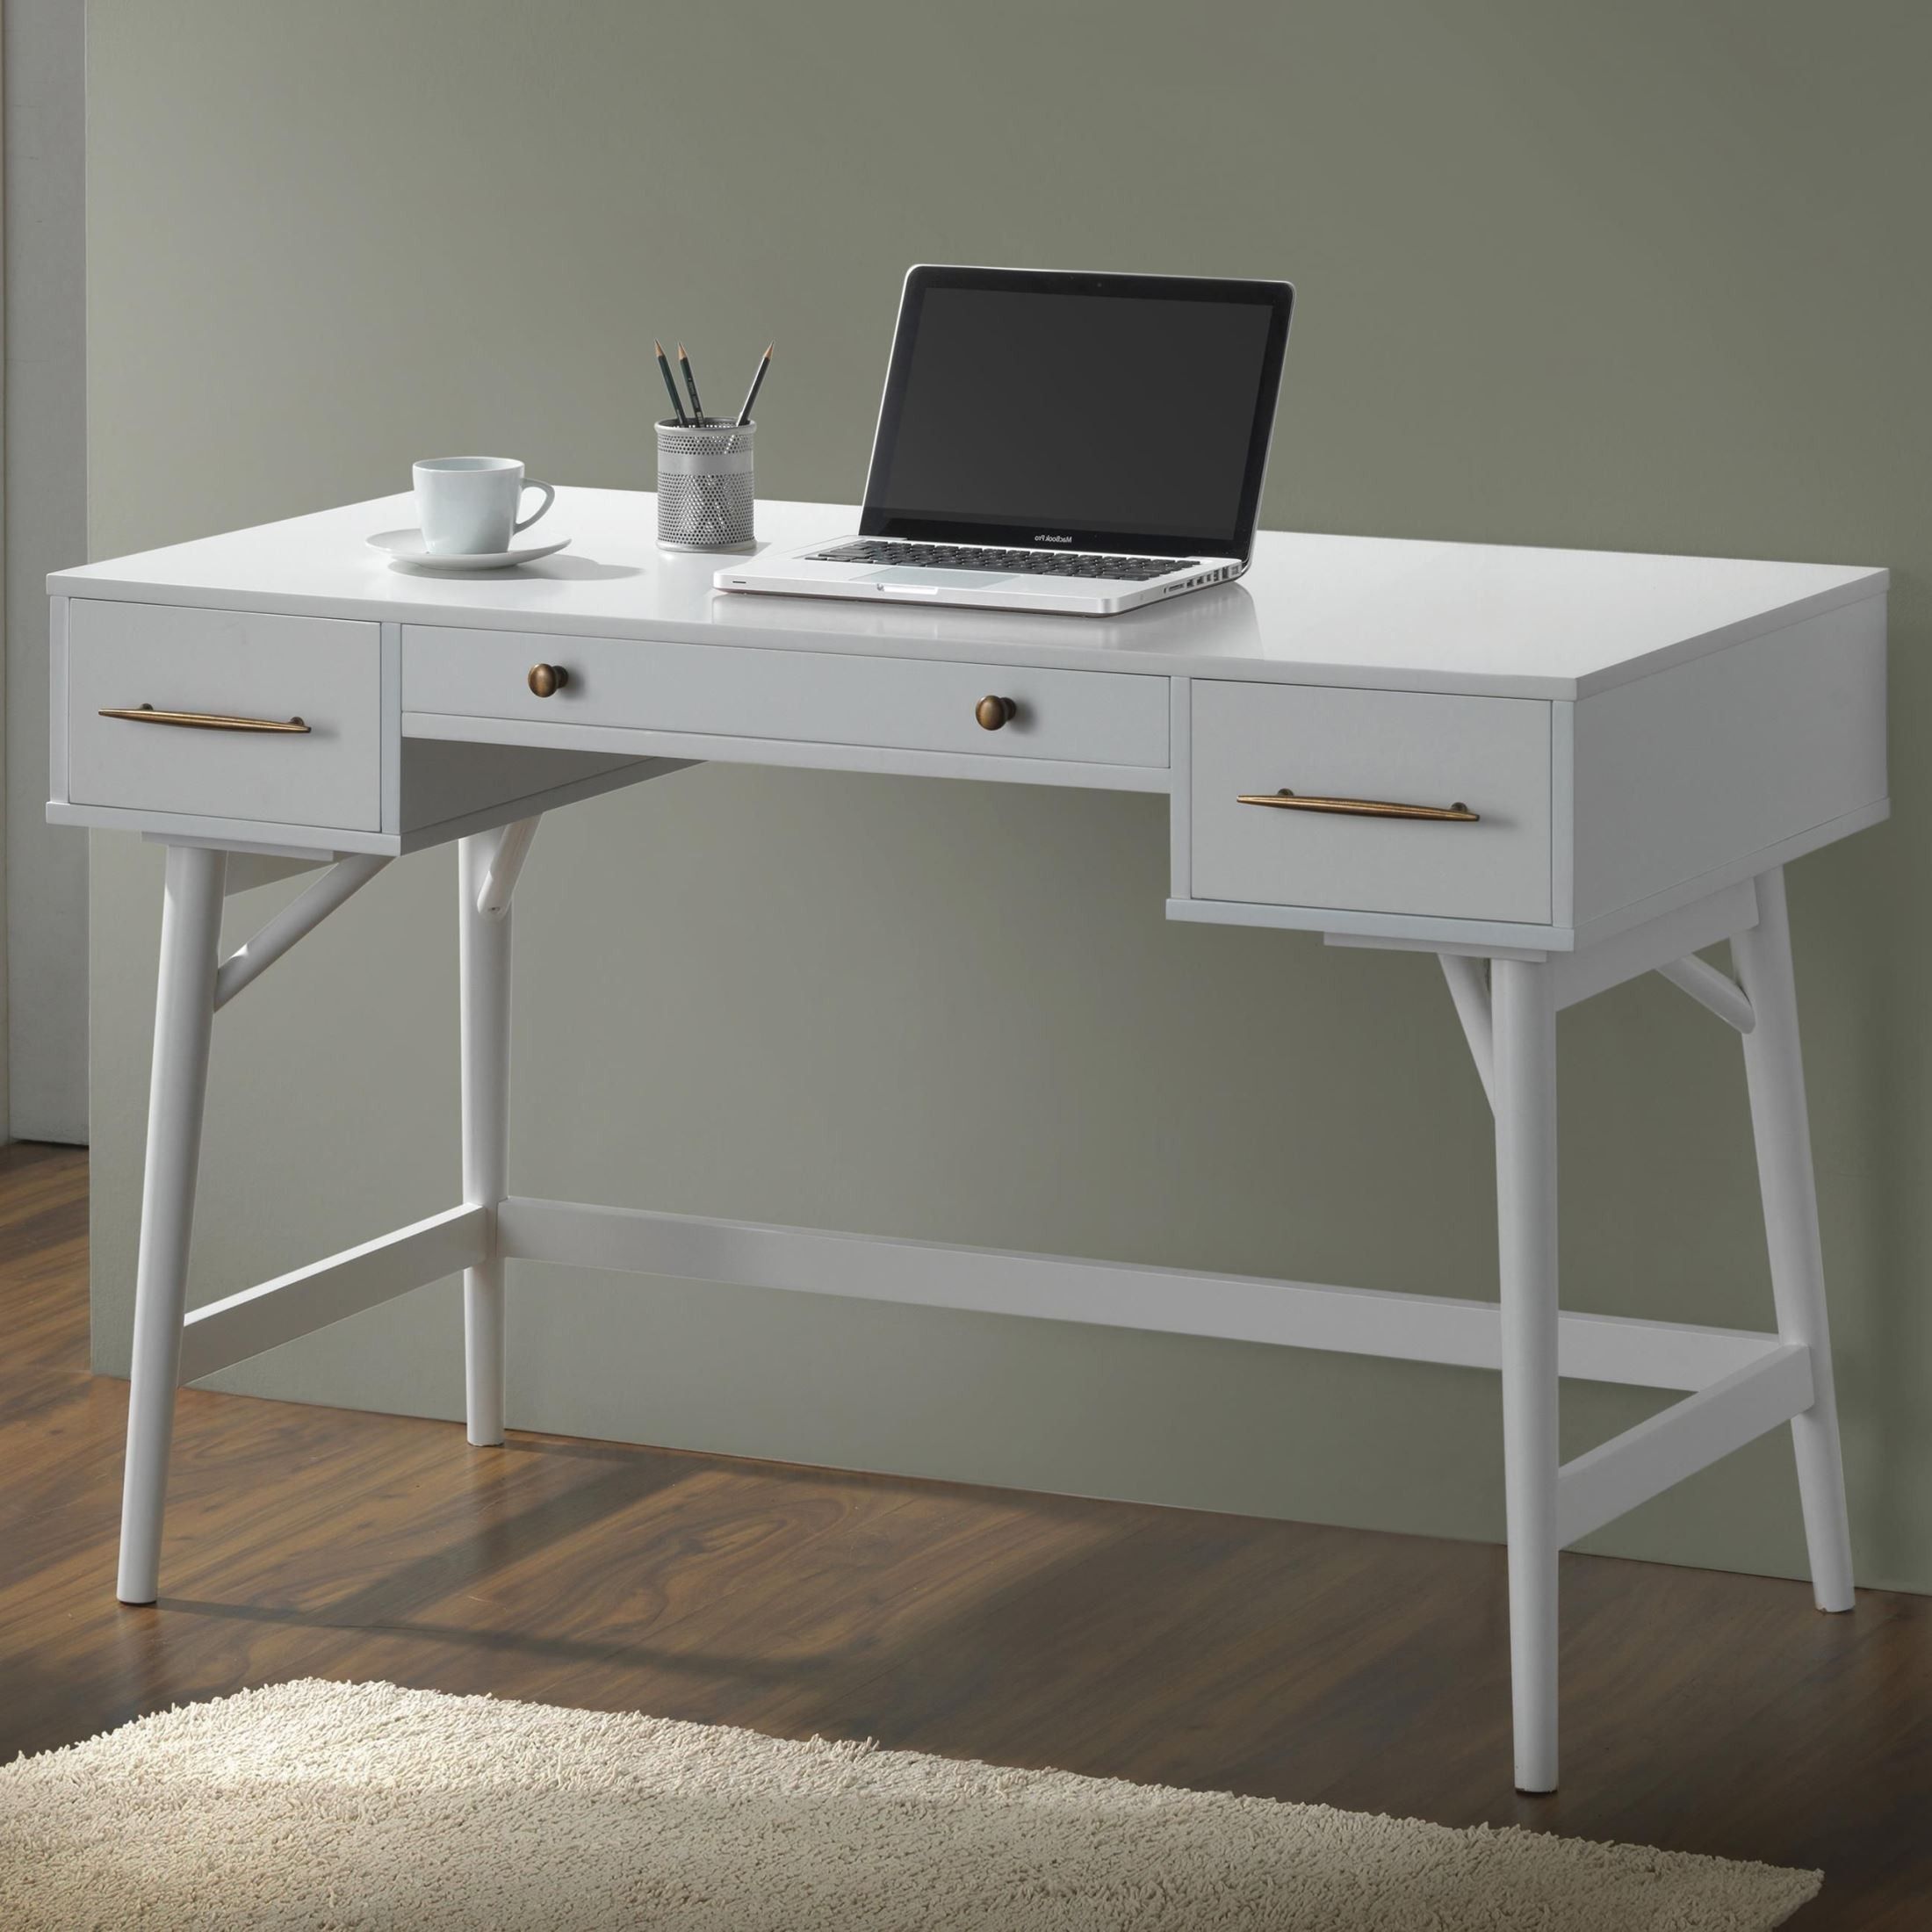 800745 White Writing Desk From Coaster (800745) | Coleman Furniture Throughout White Wood Modern Writing Desks (View 6 of 15)